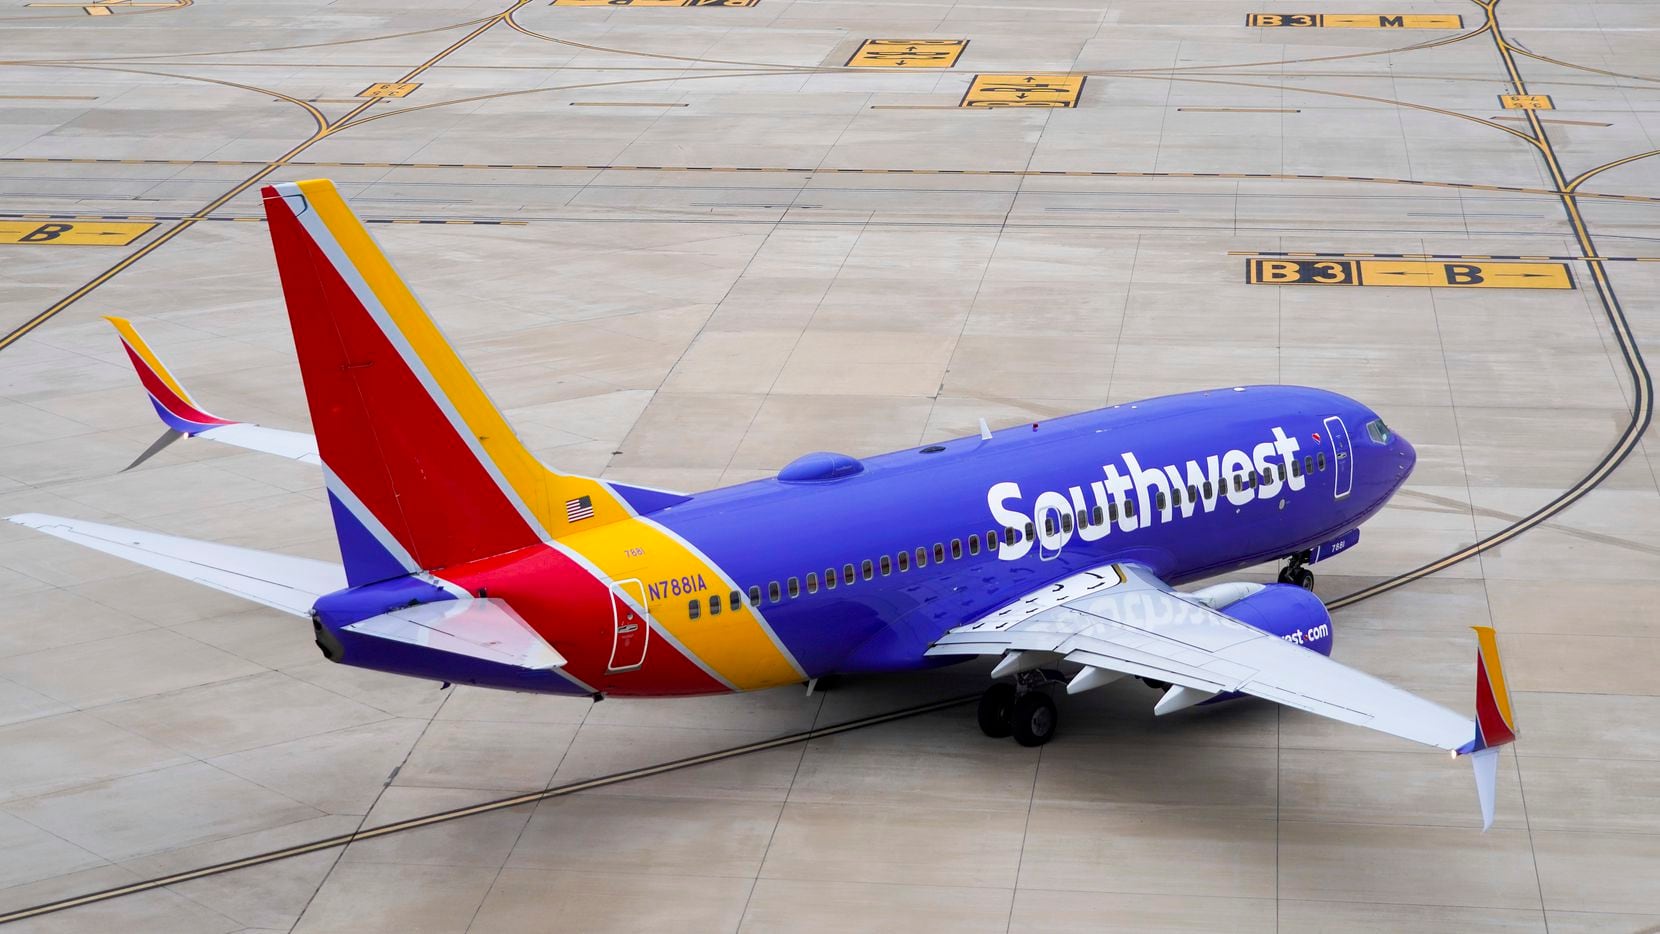 Southwest Airlines and others have cut deeply to try to run their companies profitably, but...